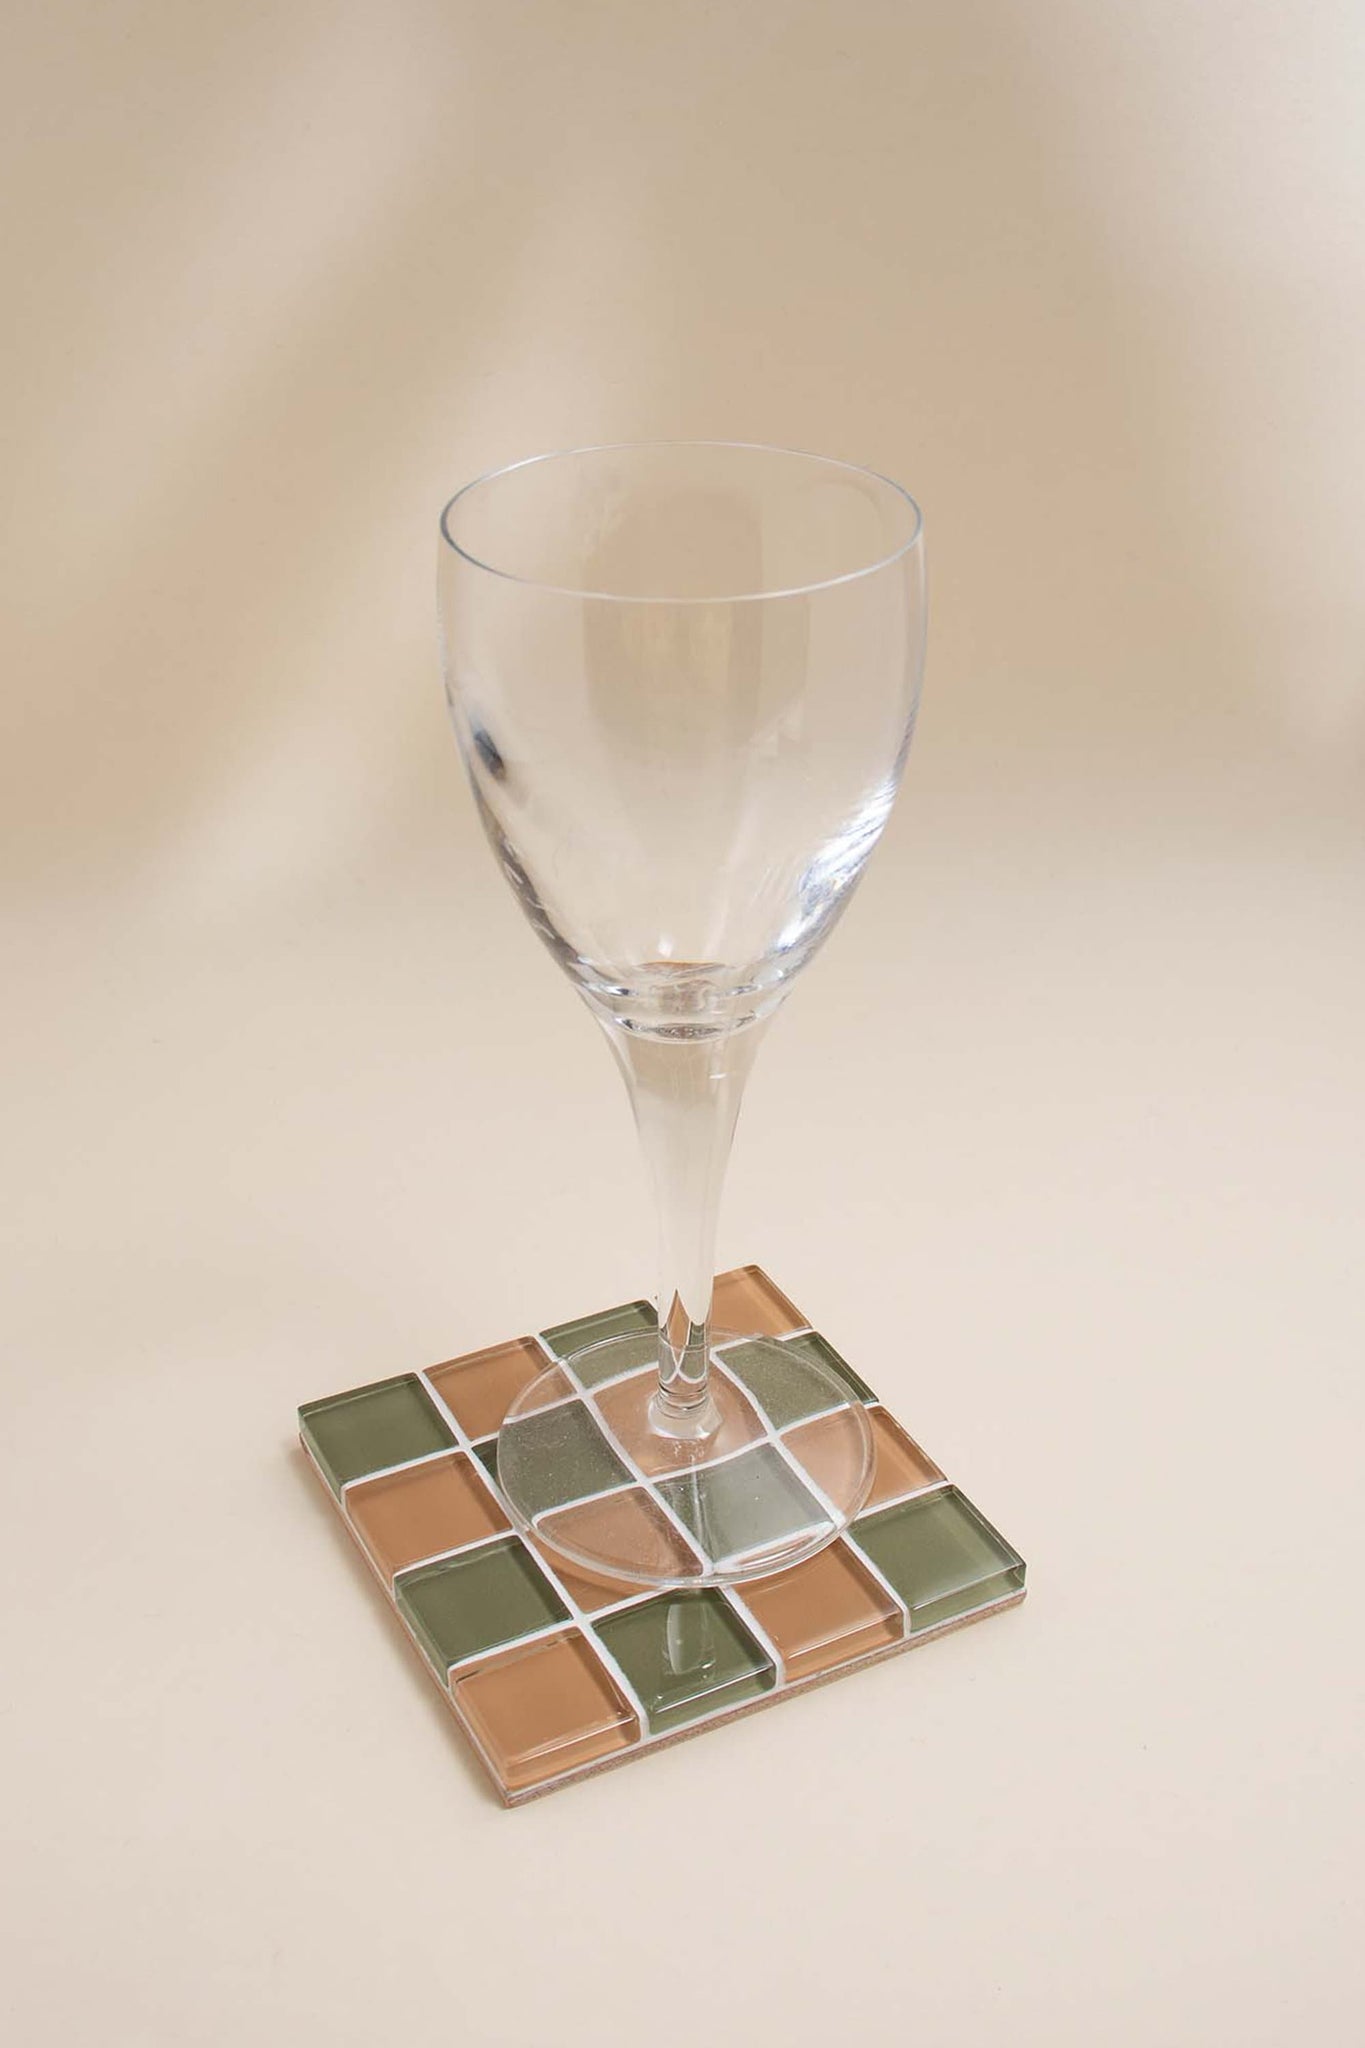 Checkered Glass Tile Coaster | Handmade Drink Coaster | Square Coaster | Housewarming Gift | Gift for Her | Gift for Him | Valentine Gift